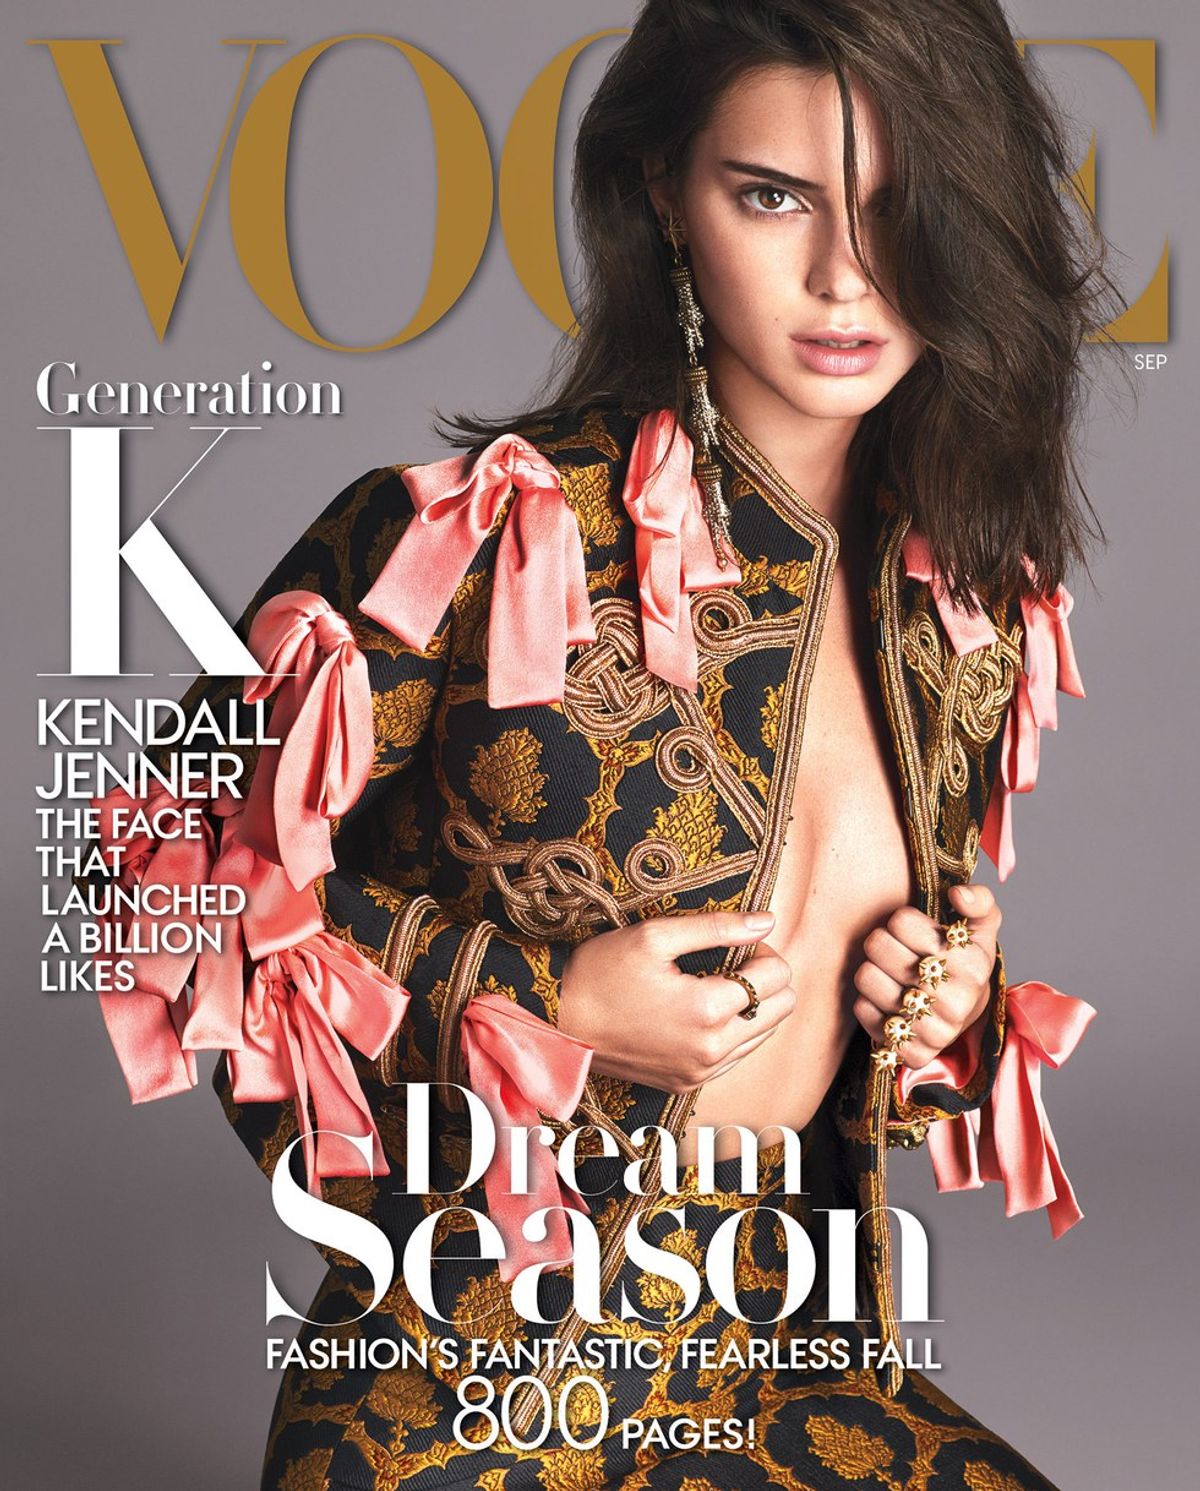 Why The Vogue September Issue is Important